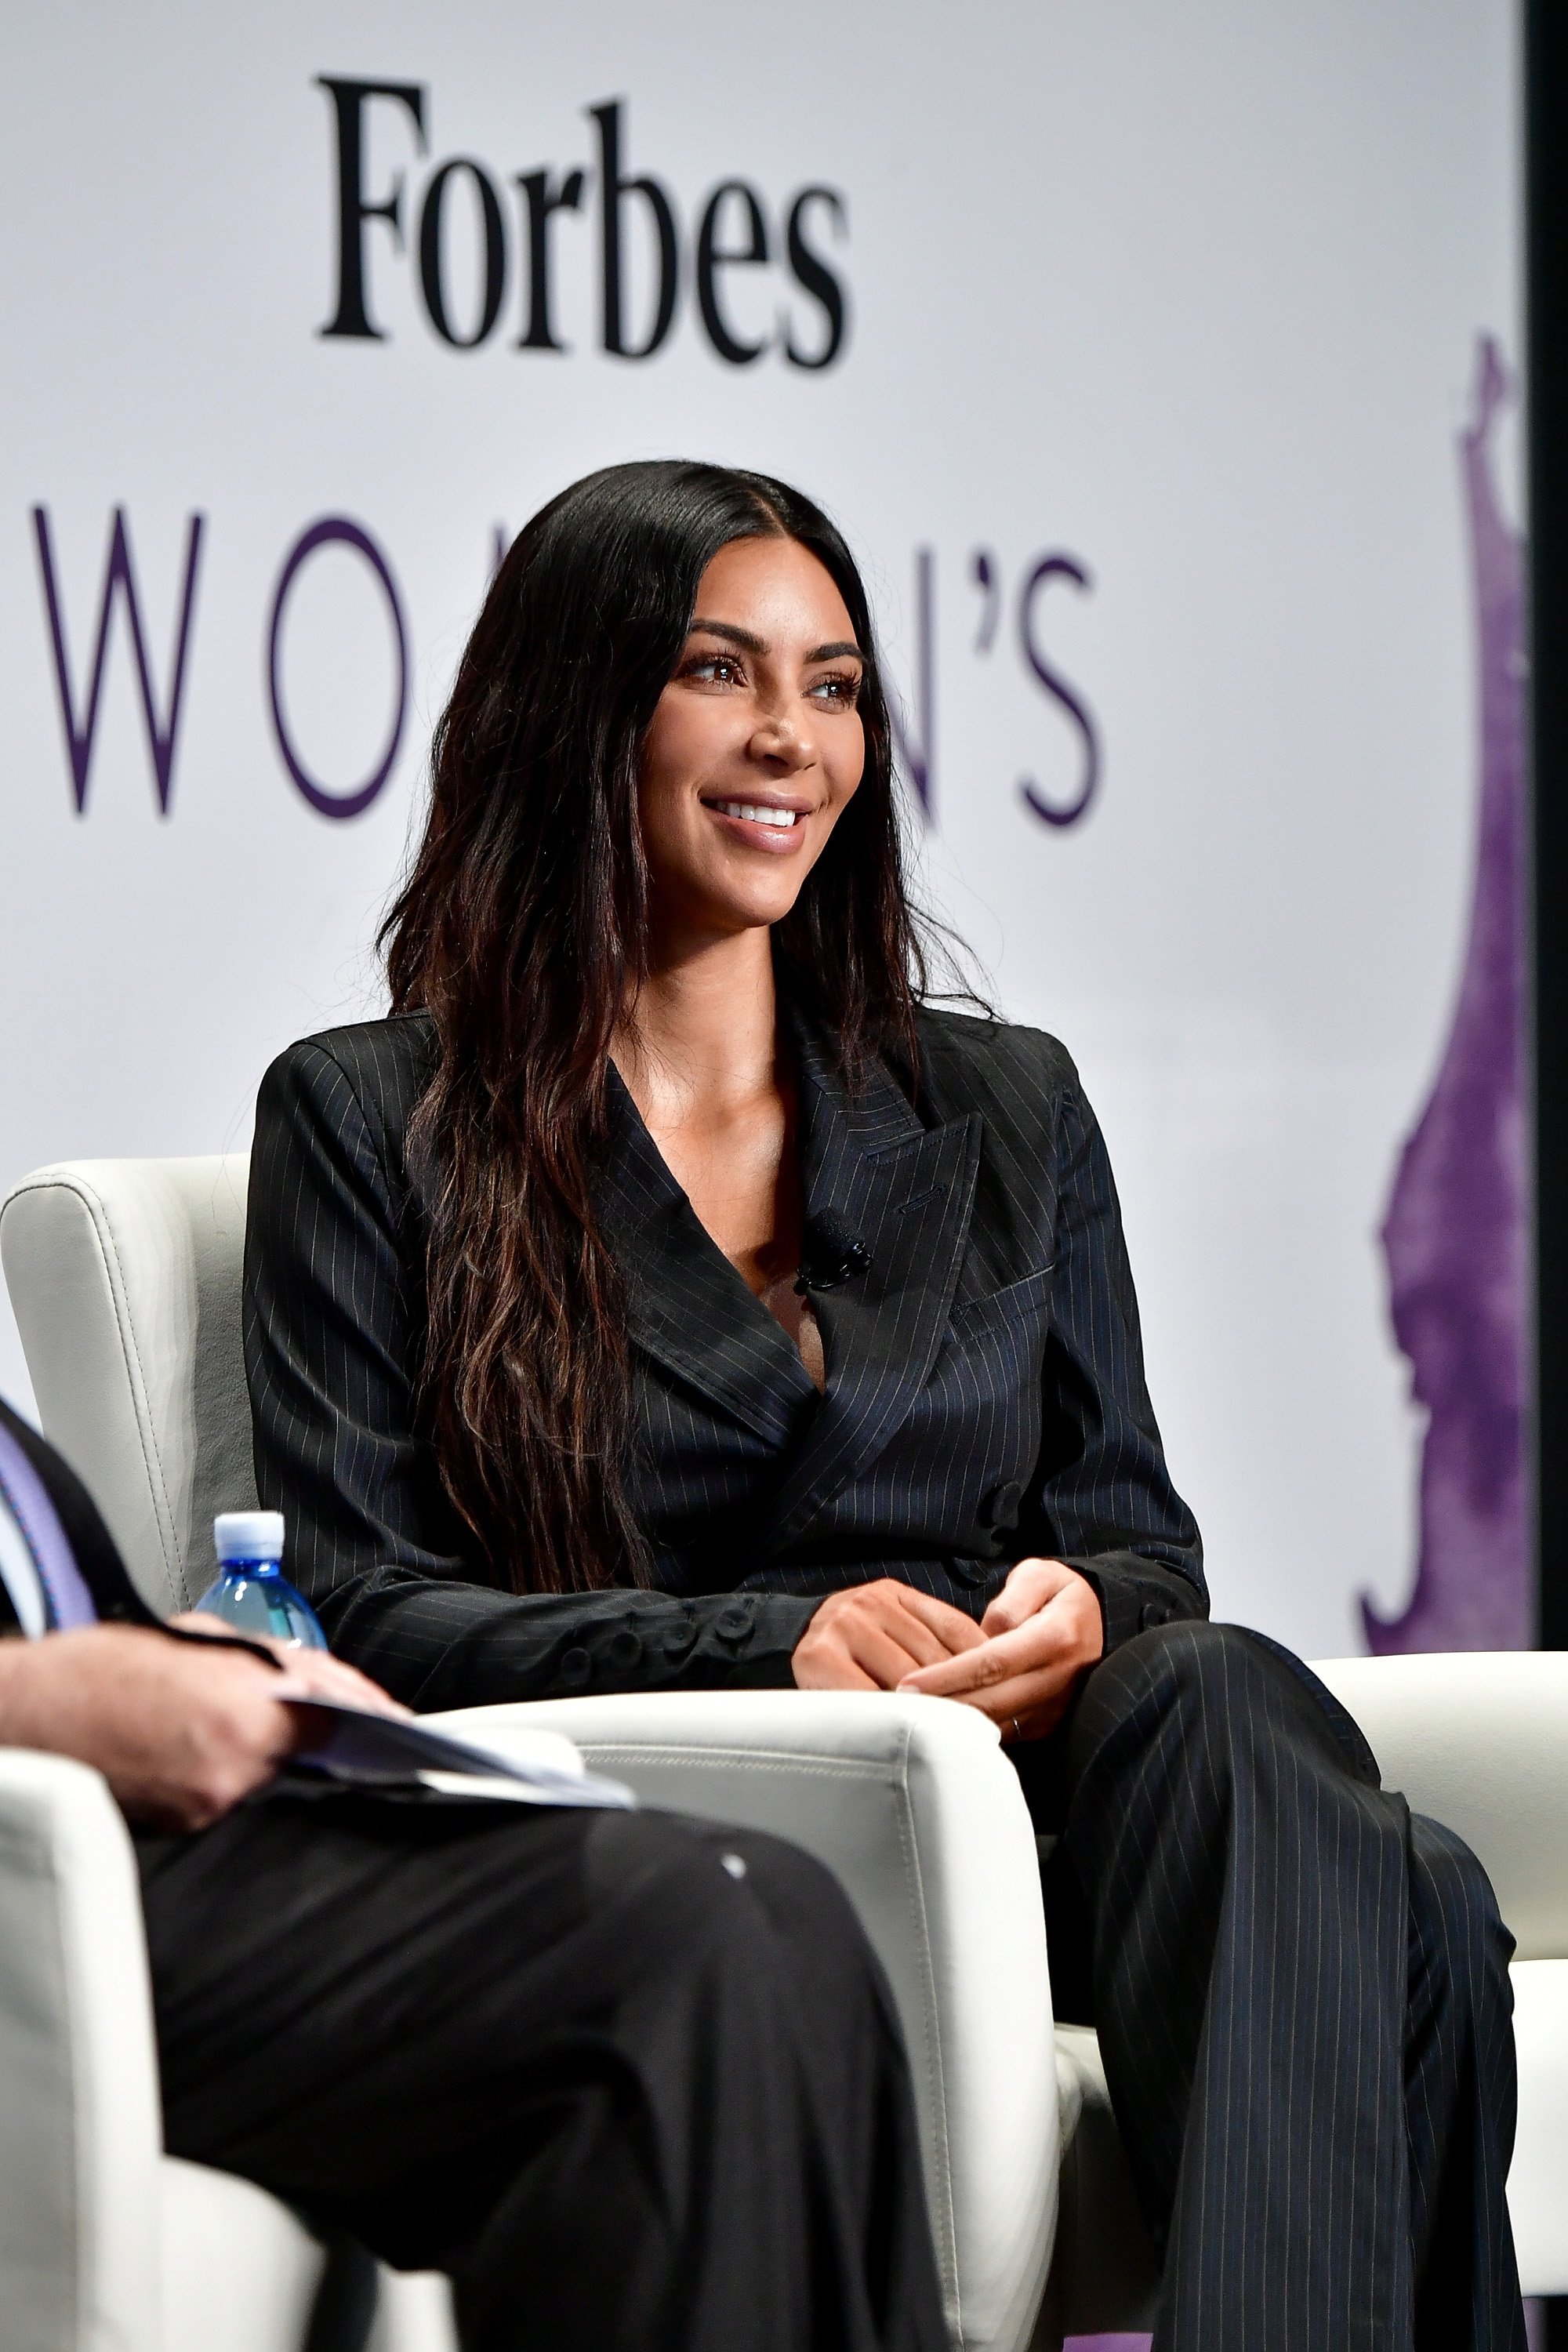 Kim Kardashian speaking onstage during the Forbes Women's Summit at Spring Studios on June 13, 2017 in New York City | Photo: Getty Images